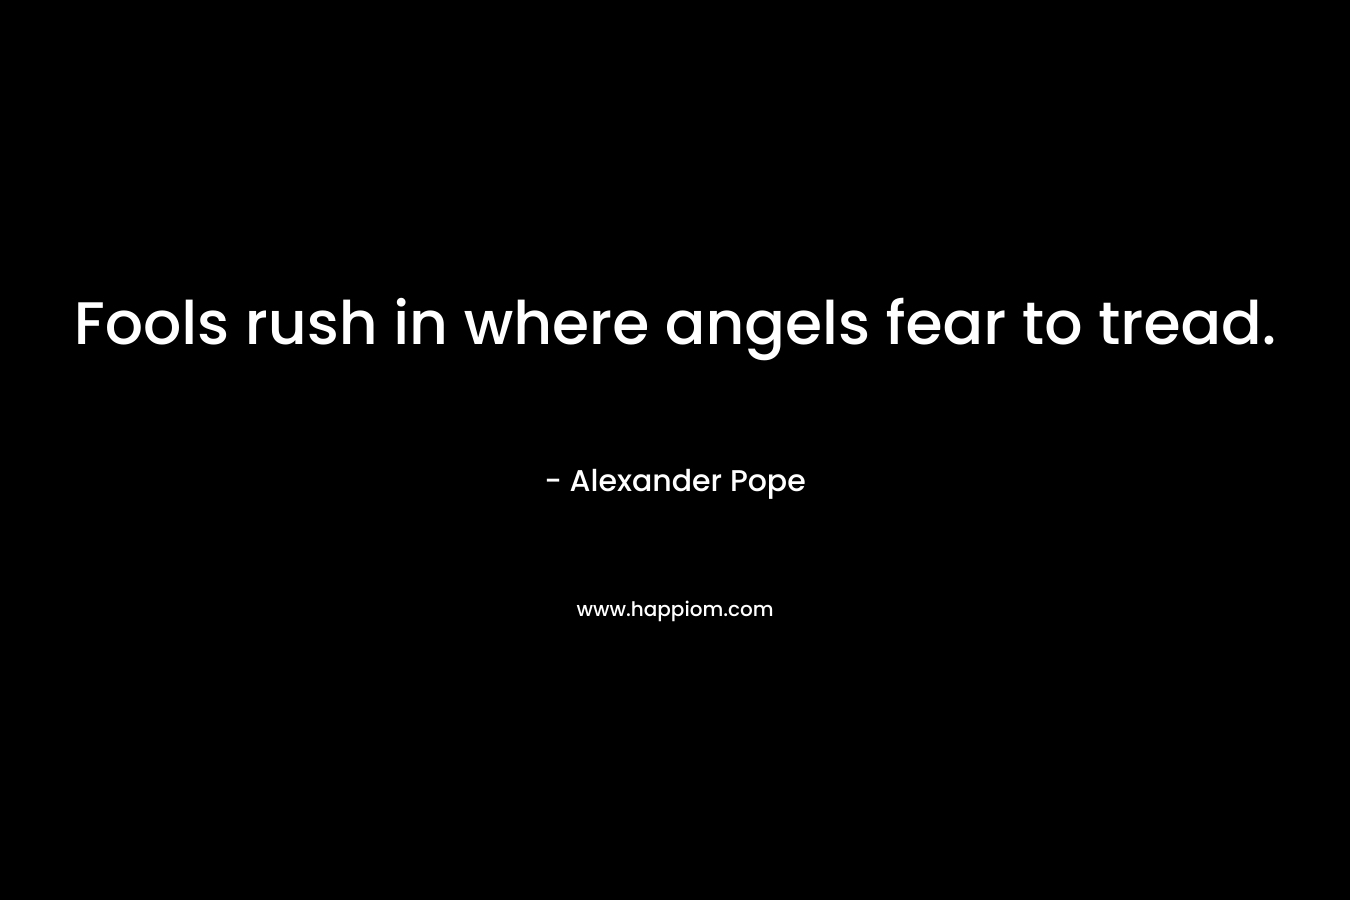 Fools rush in where angels fear to tread. – Alexander Pope